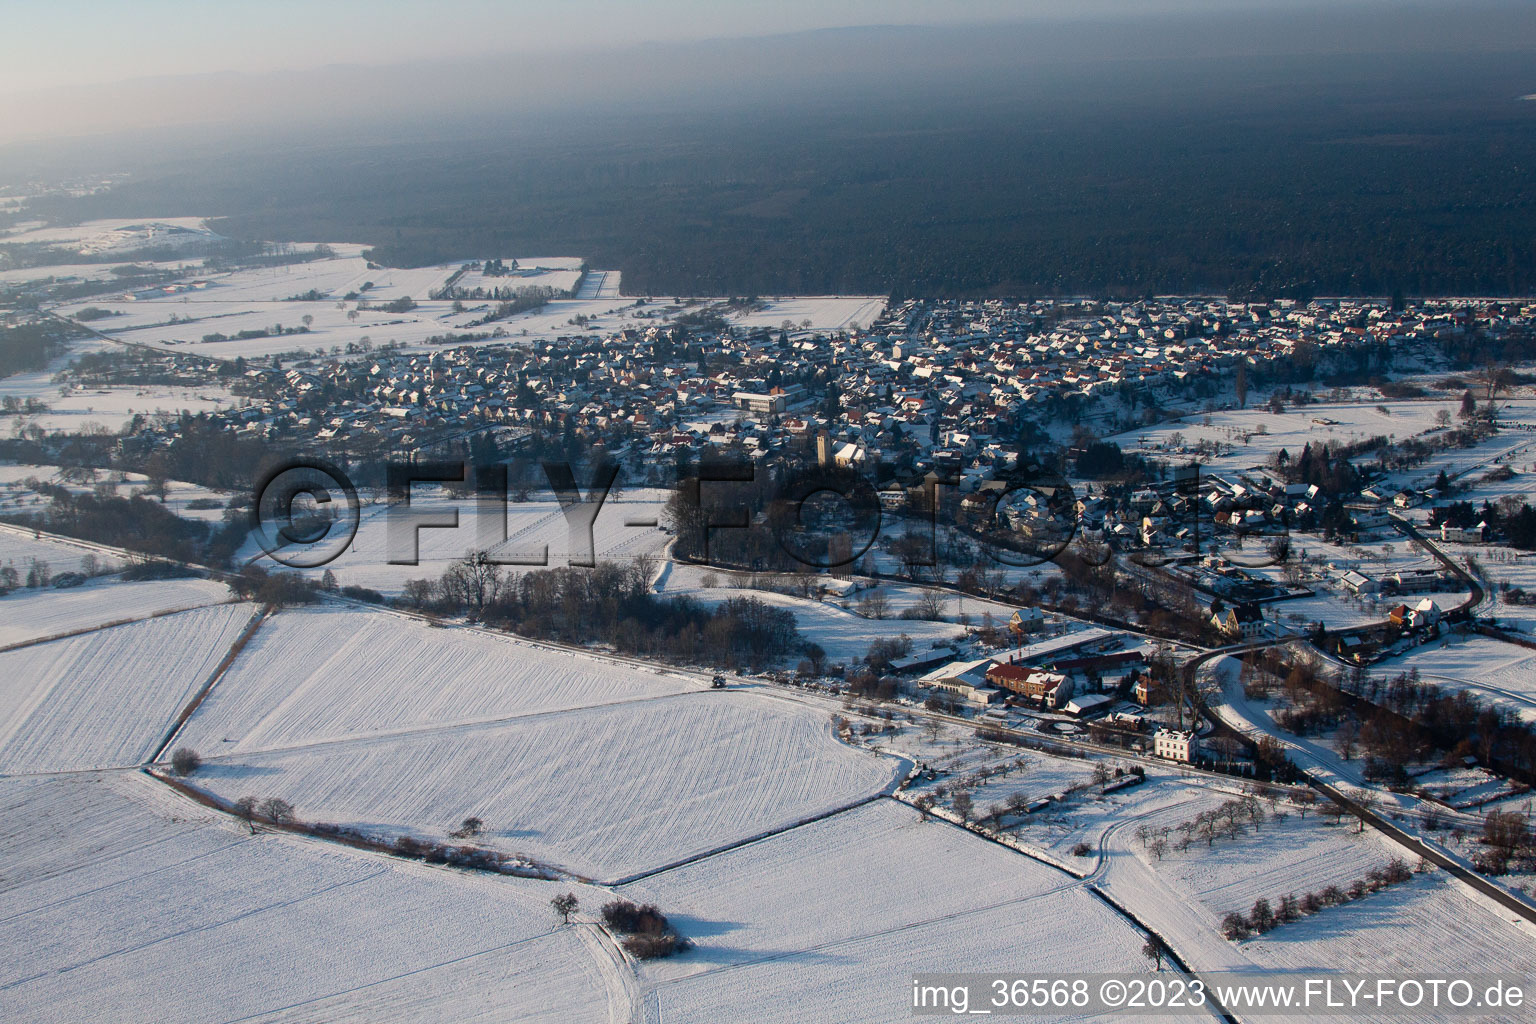 Berg in the state Rhineland-Palatinate, Germany from above